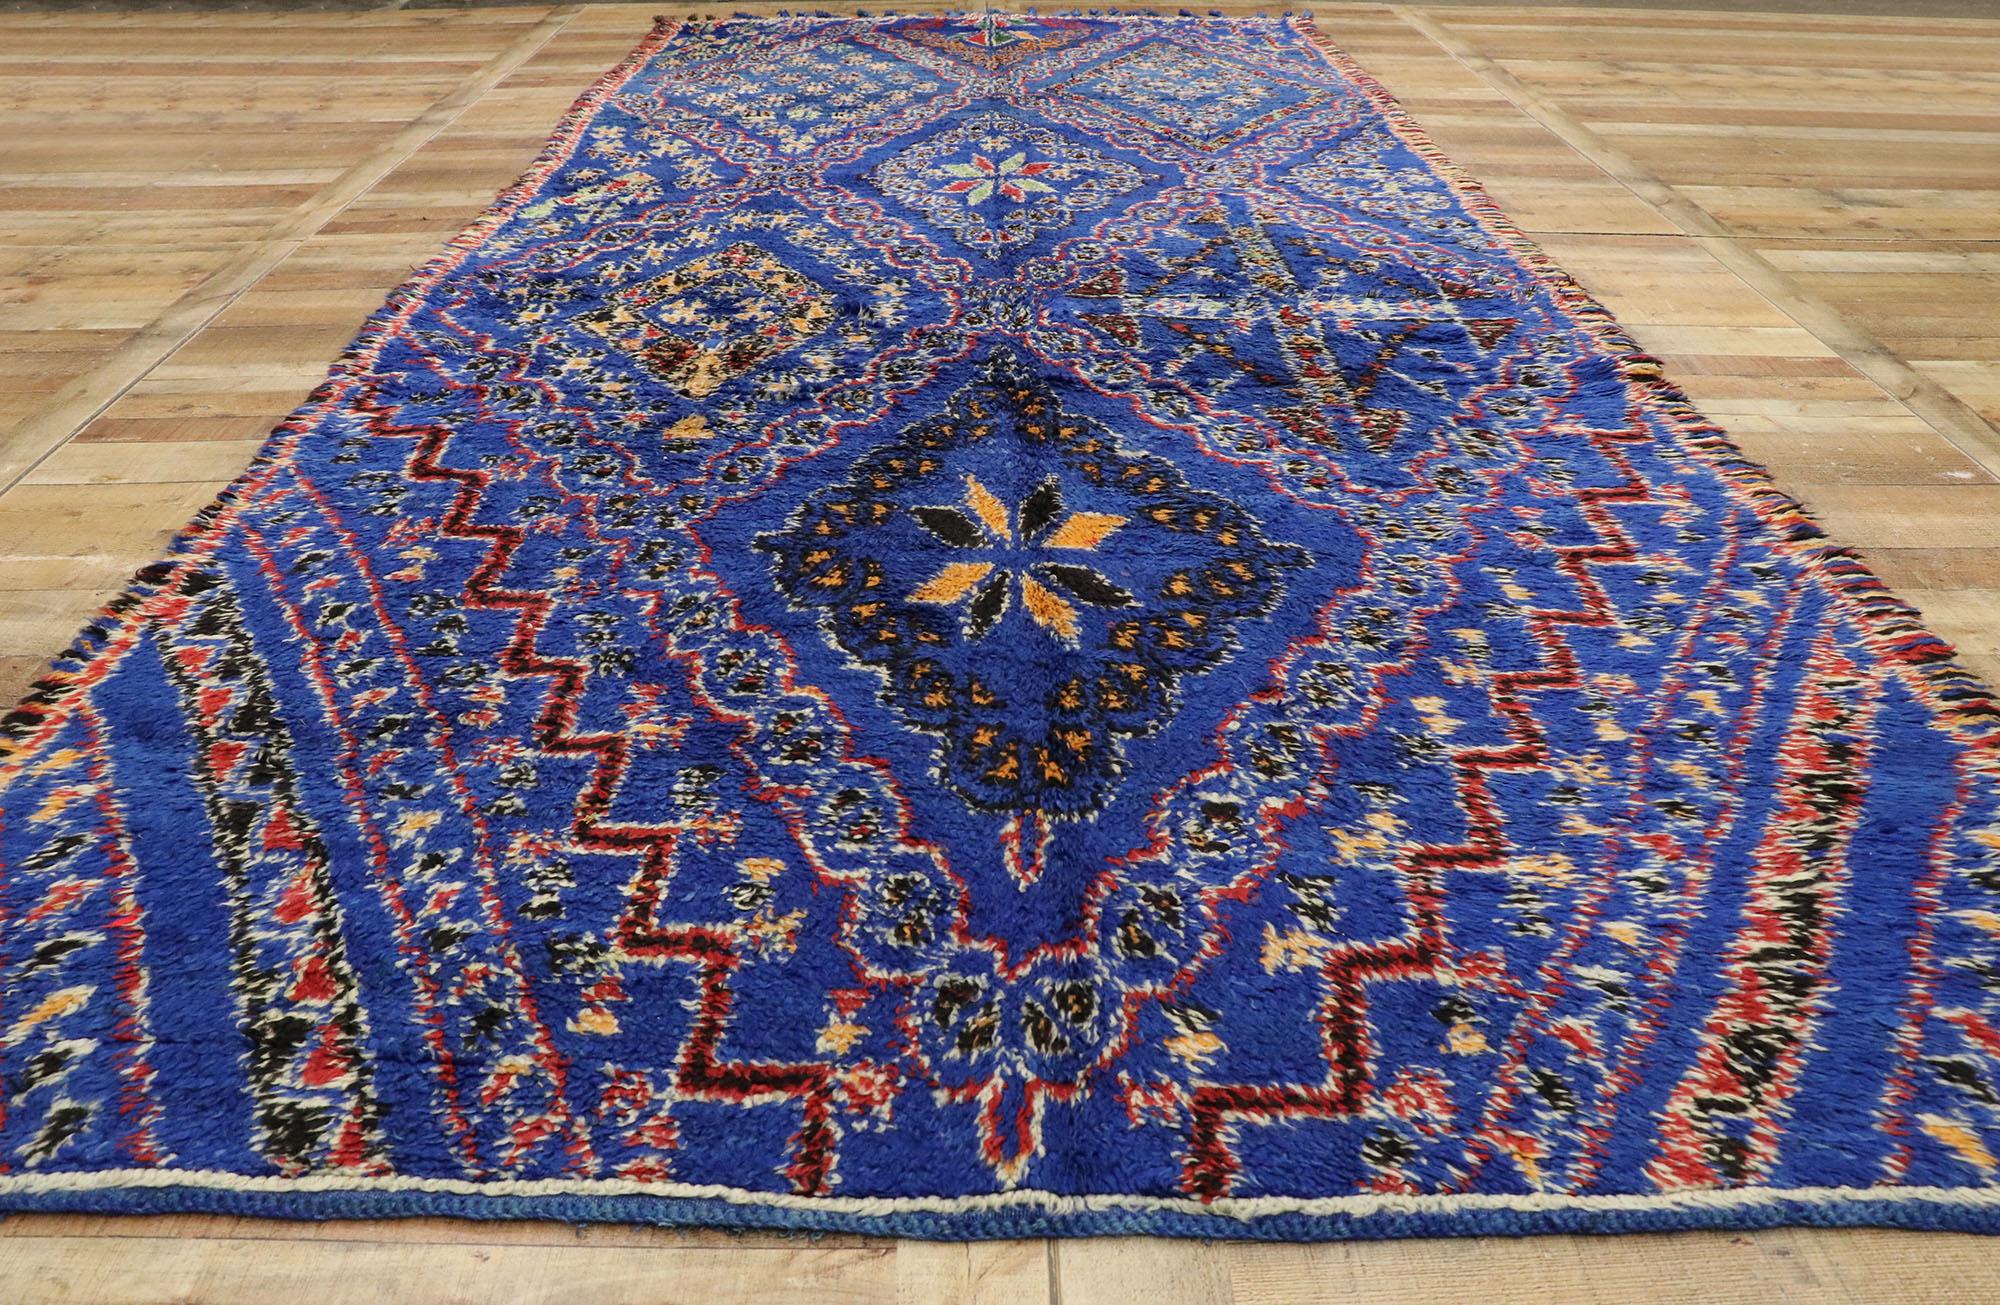 Vintage Blue Beni Mguild Moroccan Rug with Mid-Century Modern Tribal Style For Sale 1